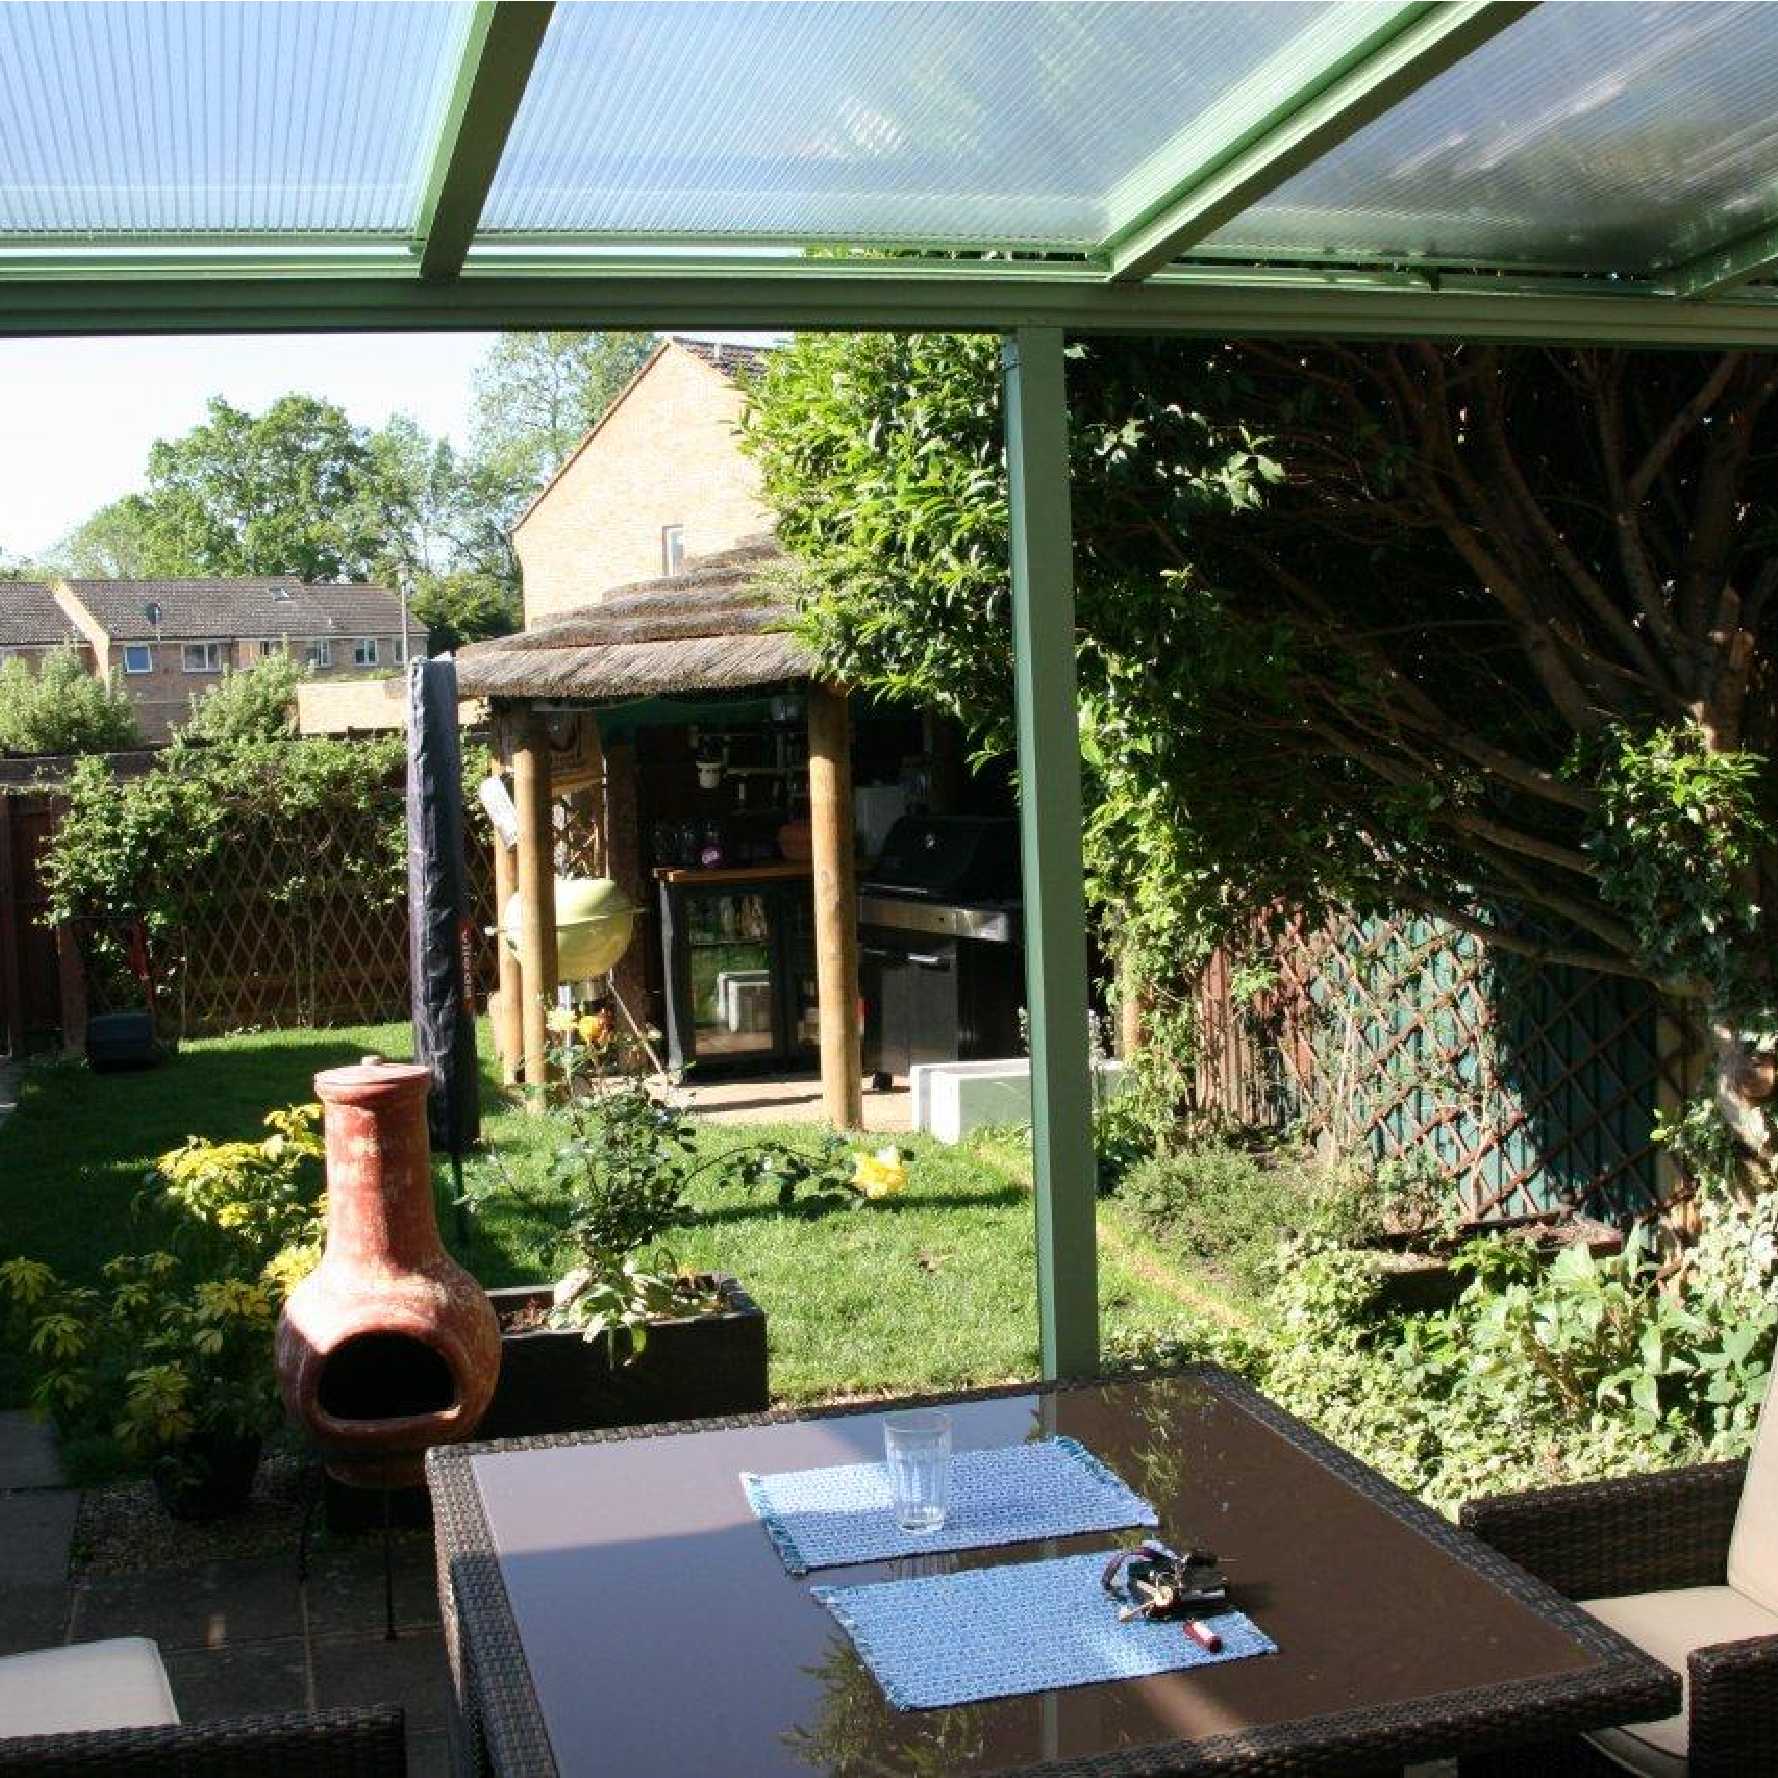 Affordable Omega Smart Lean-To Canopy, White with 16mm Polycarbonate Glazing - 8.0m (W) x 4.5m (P), (4) Supporting Posts